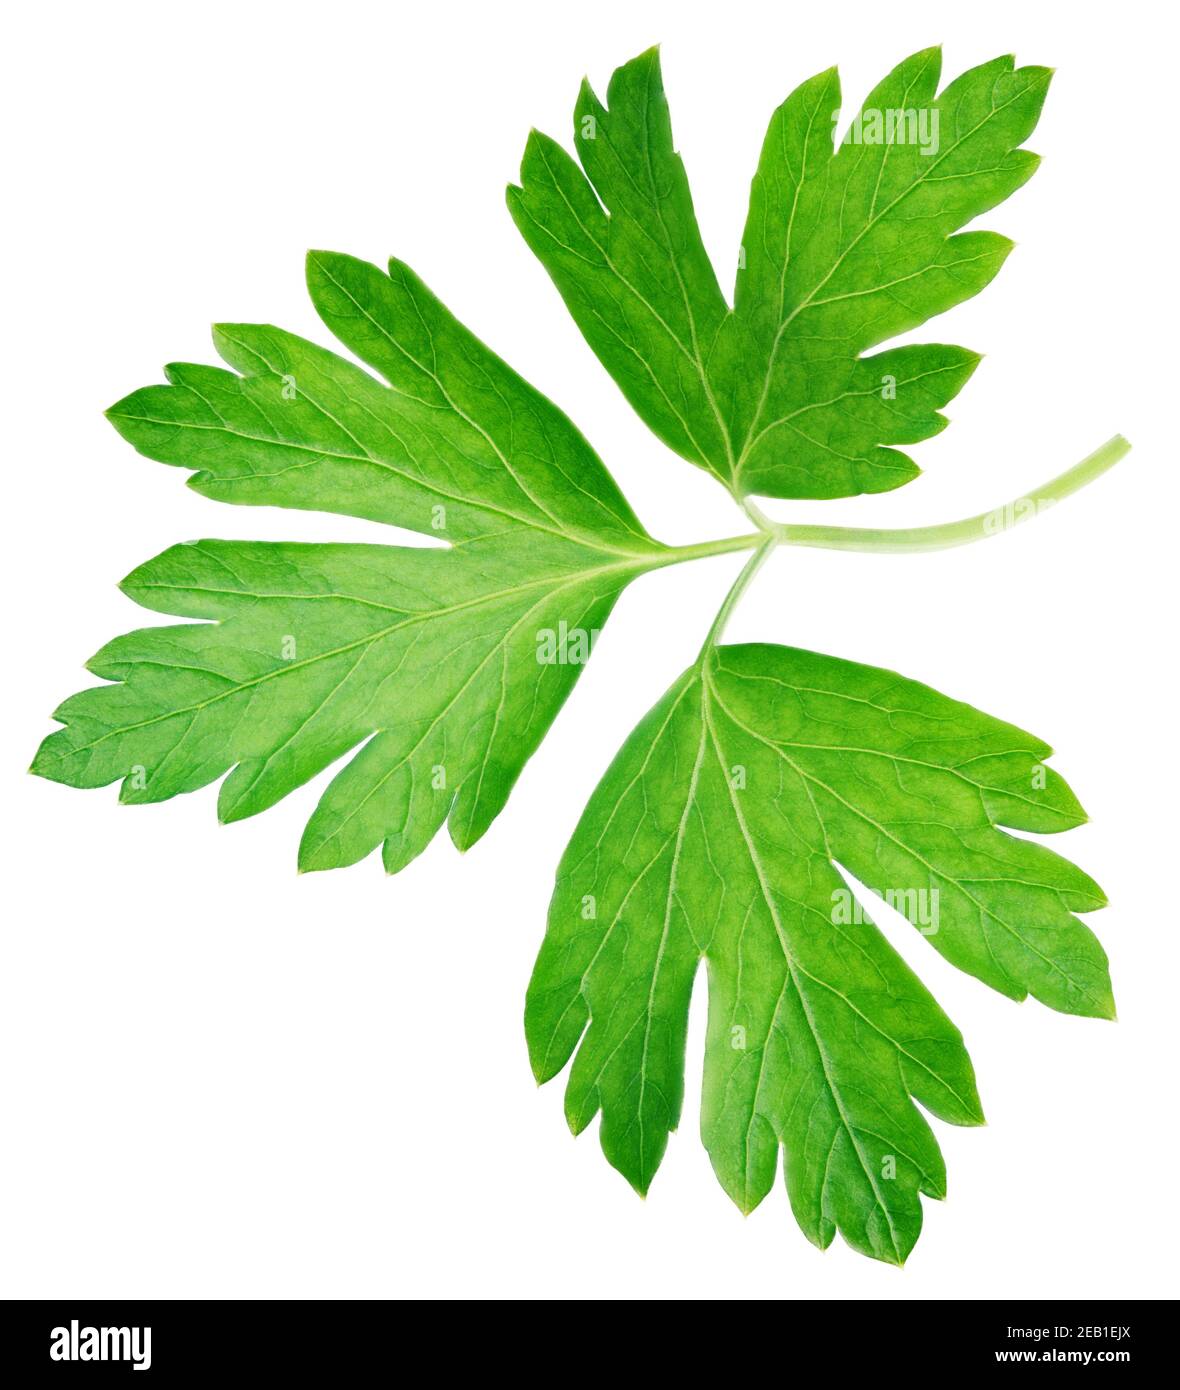 Garden parsley herb (cilantro) leaf isolated on white background with clipping path Stock Photo